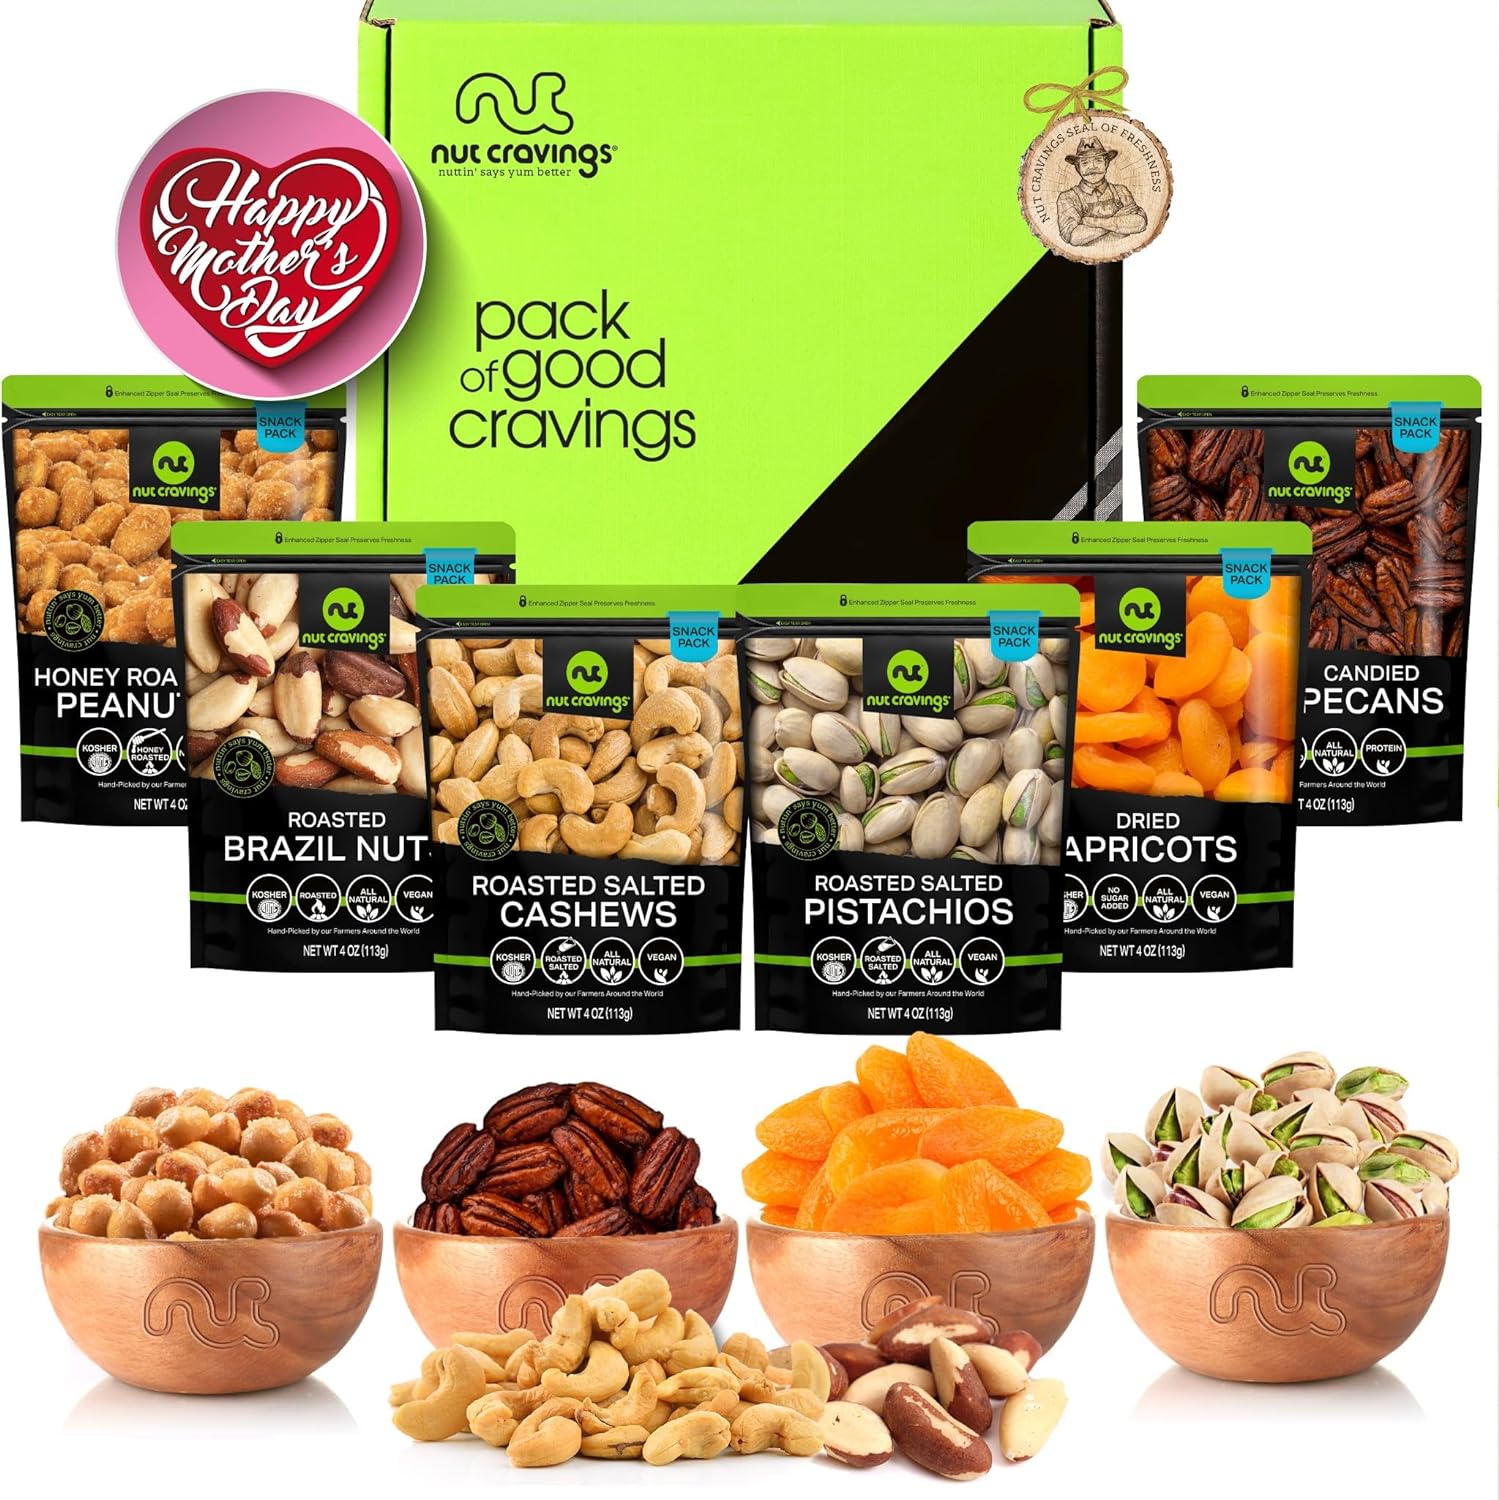 Nut Cravings Gourmet Collection - Mothers Day Dried Fruit & Mixed Nuts Gift Basket in Green Box (6 Assortments) Arrangement Platter, Birthday Care Package - Healthy Kosher USA Made